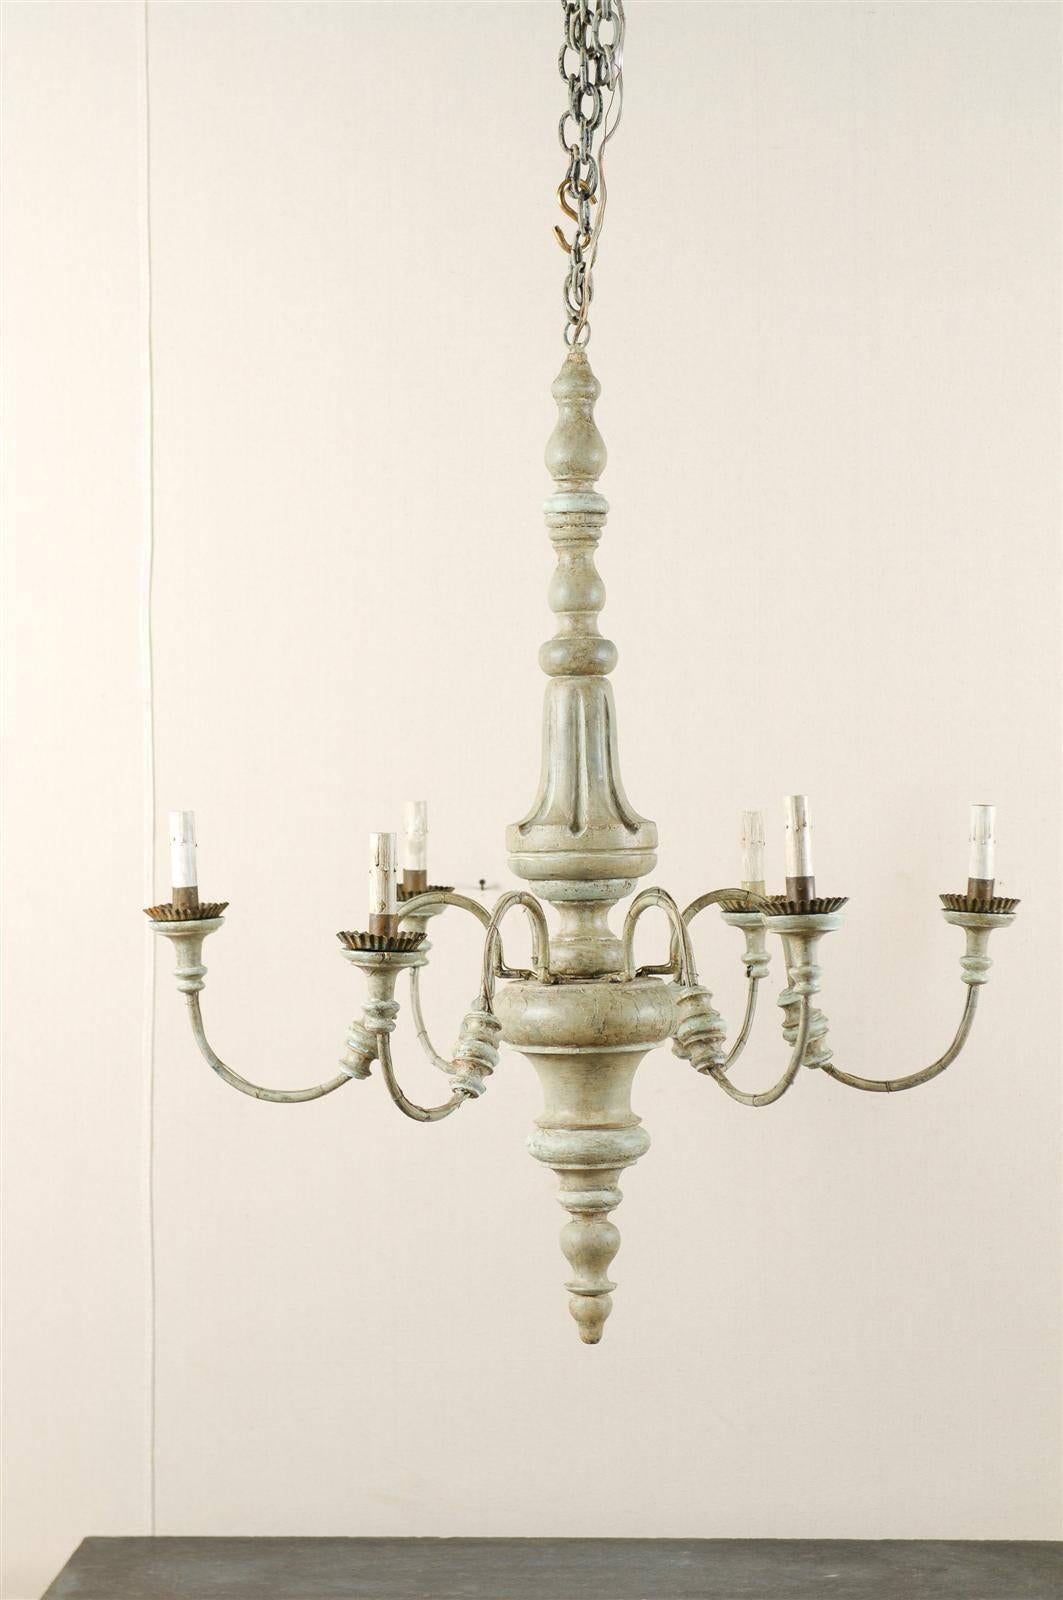 An Italian six-light chandelier from the mid-20th century. This Italian chandelier features a turned style central column with swoop arms. The central column is turned. The chandelier is a soft grey-green color with light blue accents throughout.